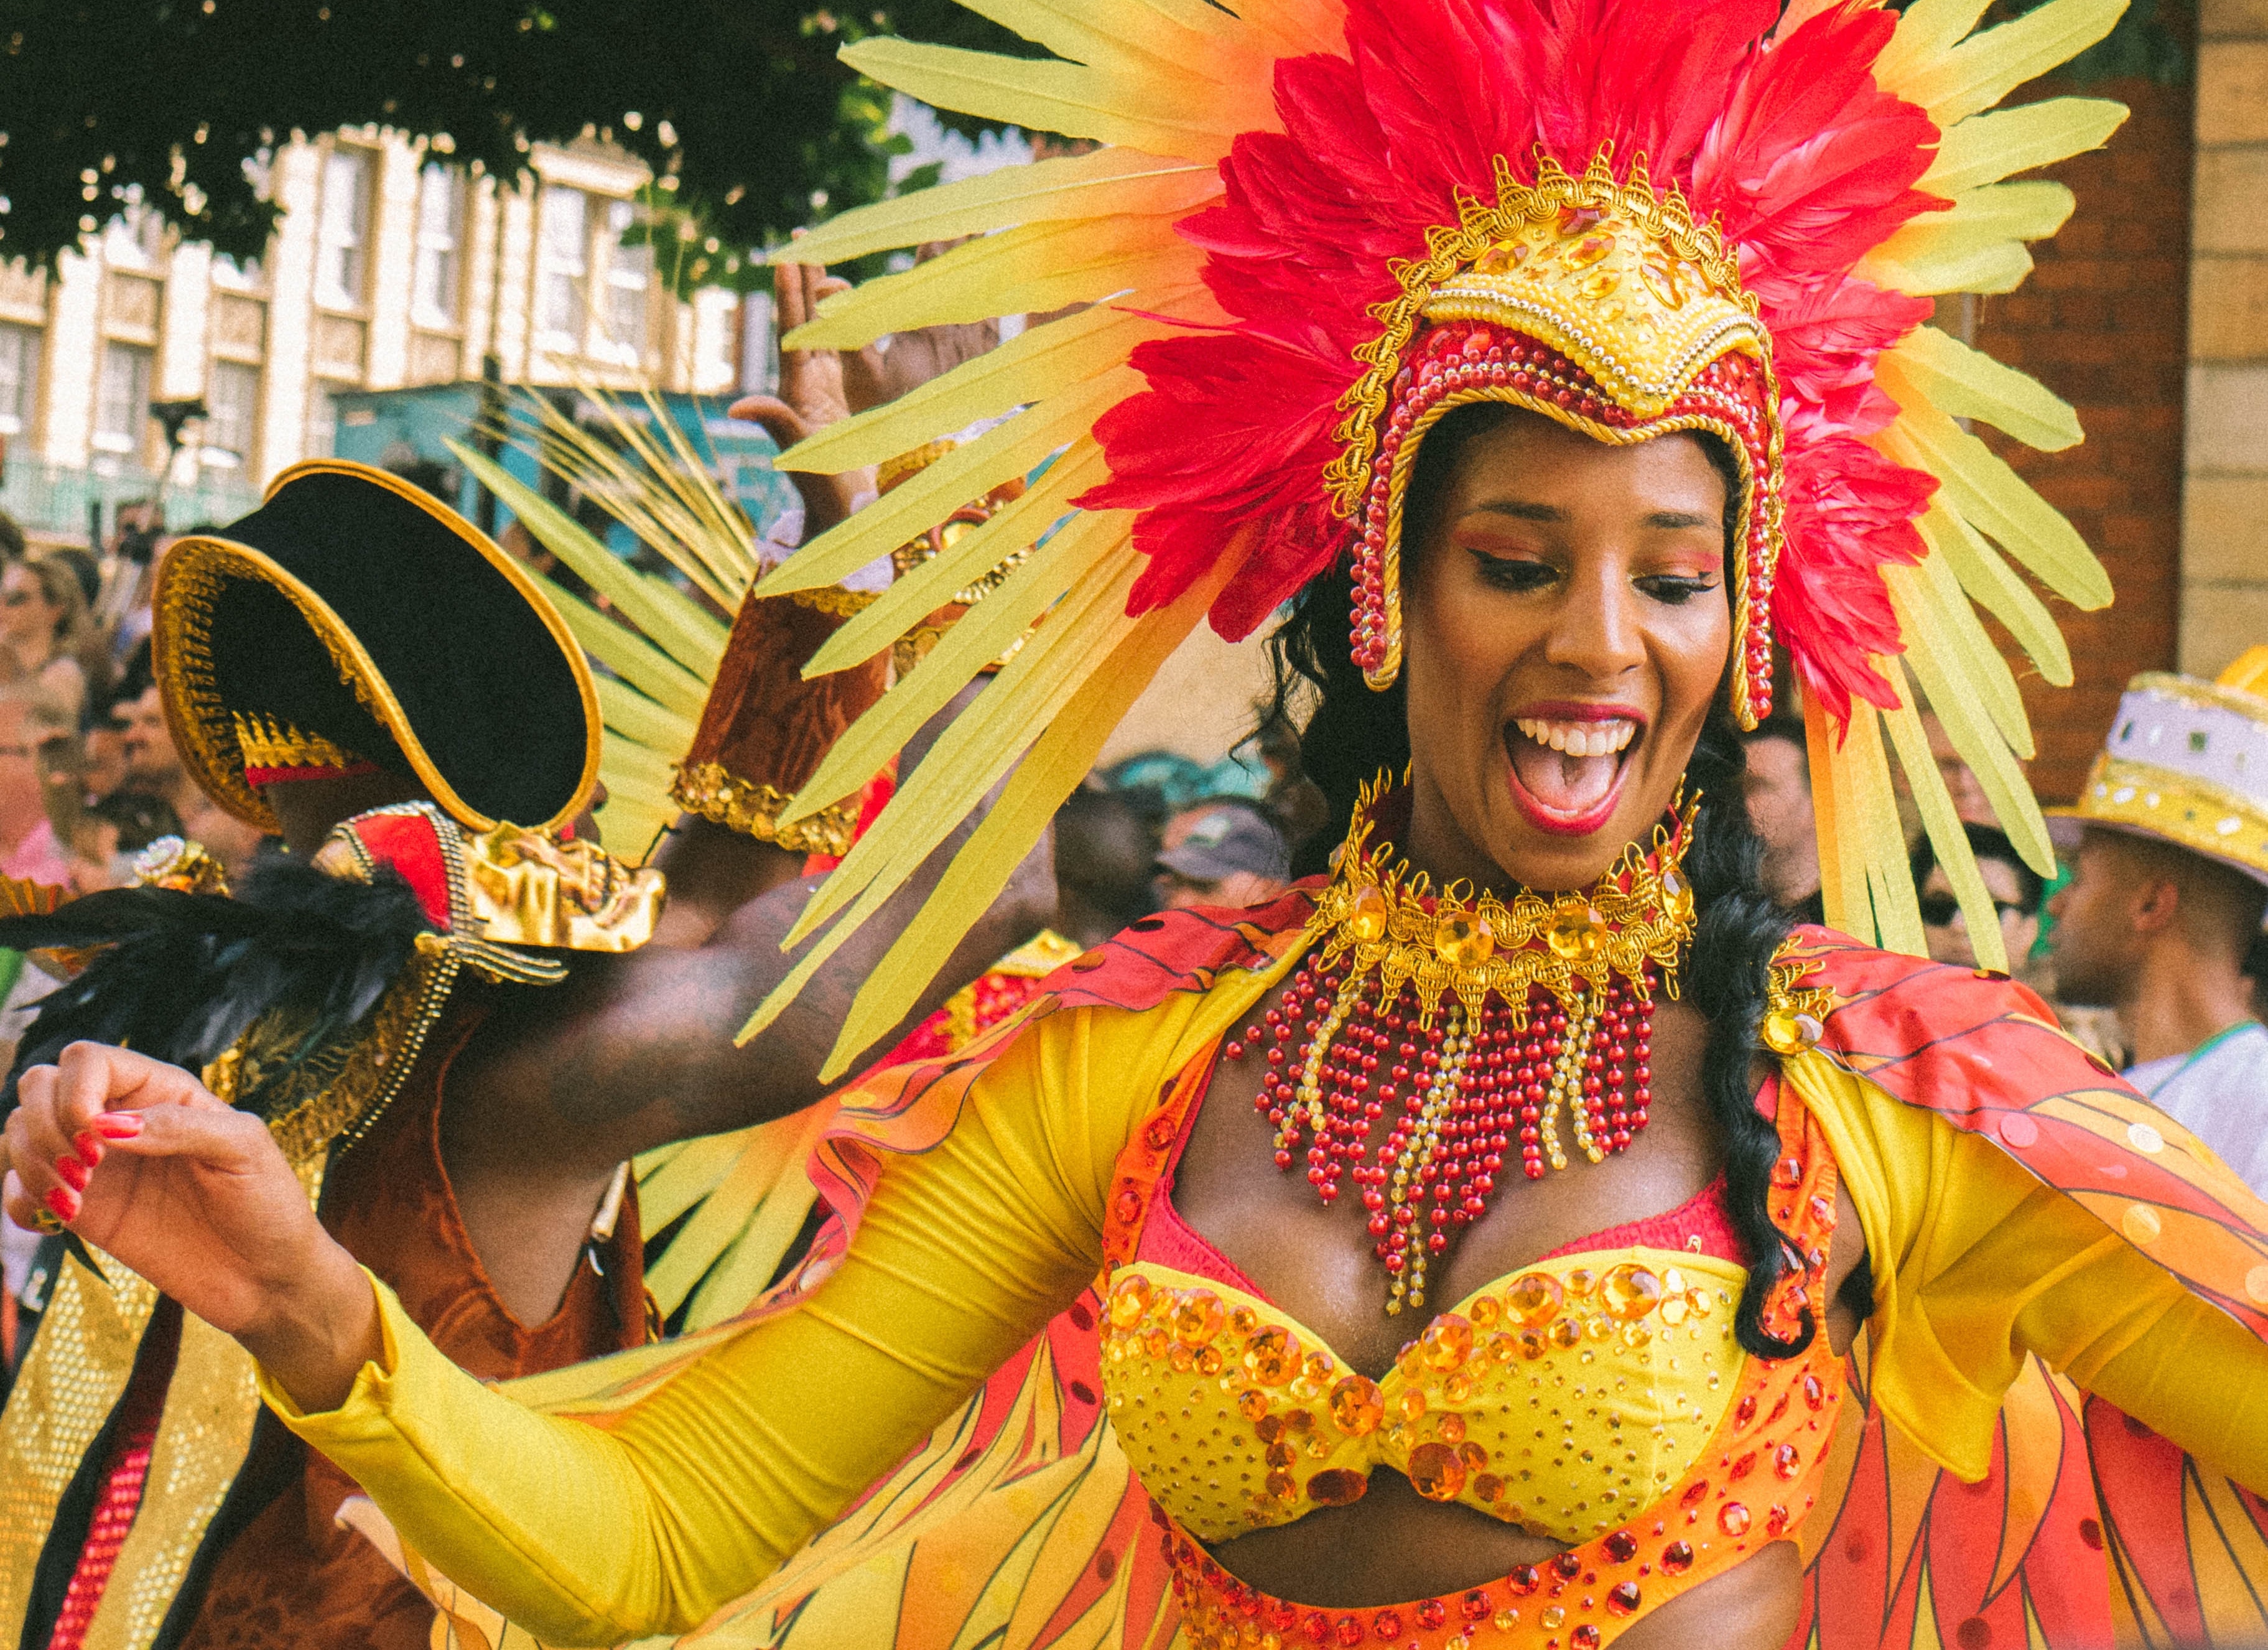 10 Caribbean Festivals In The U.S. You Should Attend This Summer